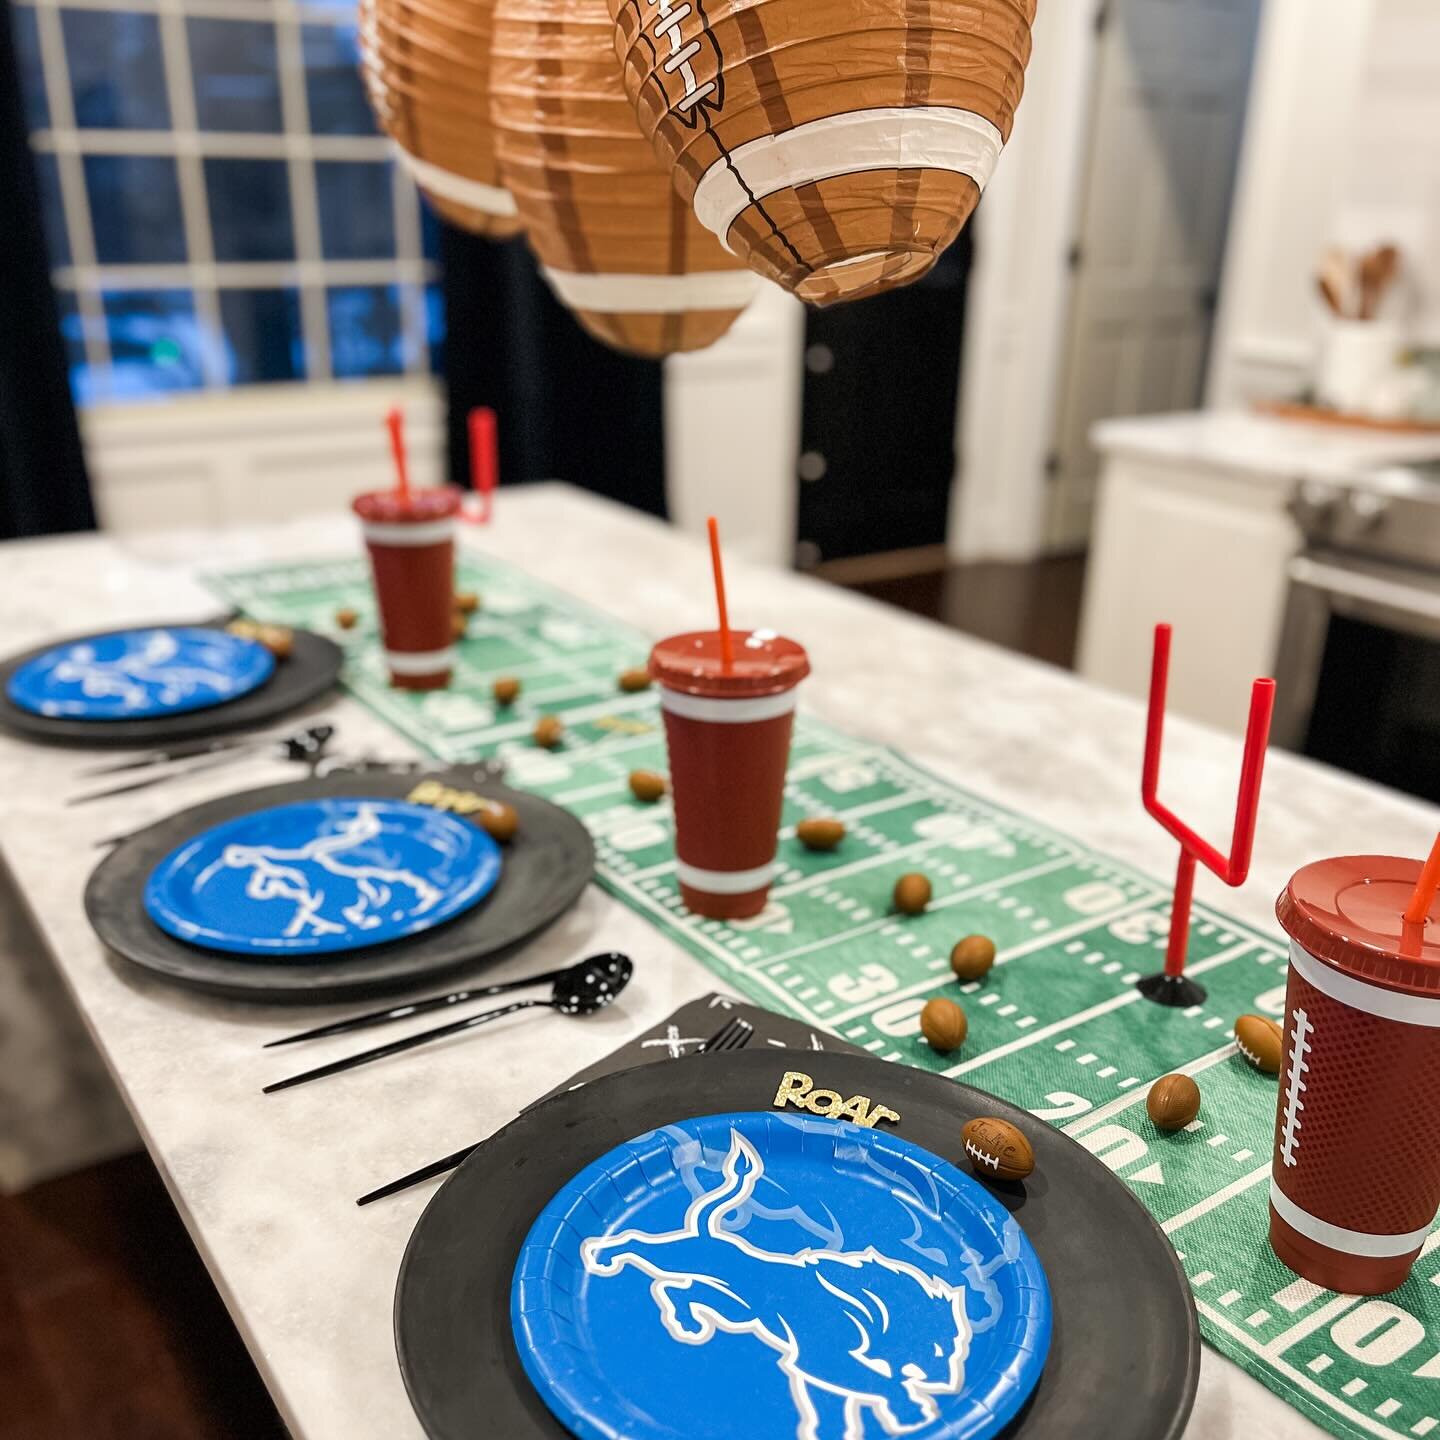 For all my superstitious friends. I just want you to know these football lanterns and this @detroitlionsnfl tablescape still remains in my kitchen since I put it together the first playoff game weeks ago! 🤞✊🪵

Anyone else doing anything superstitio